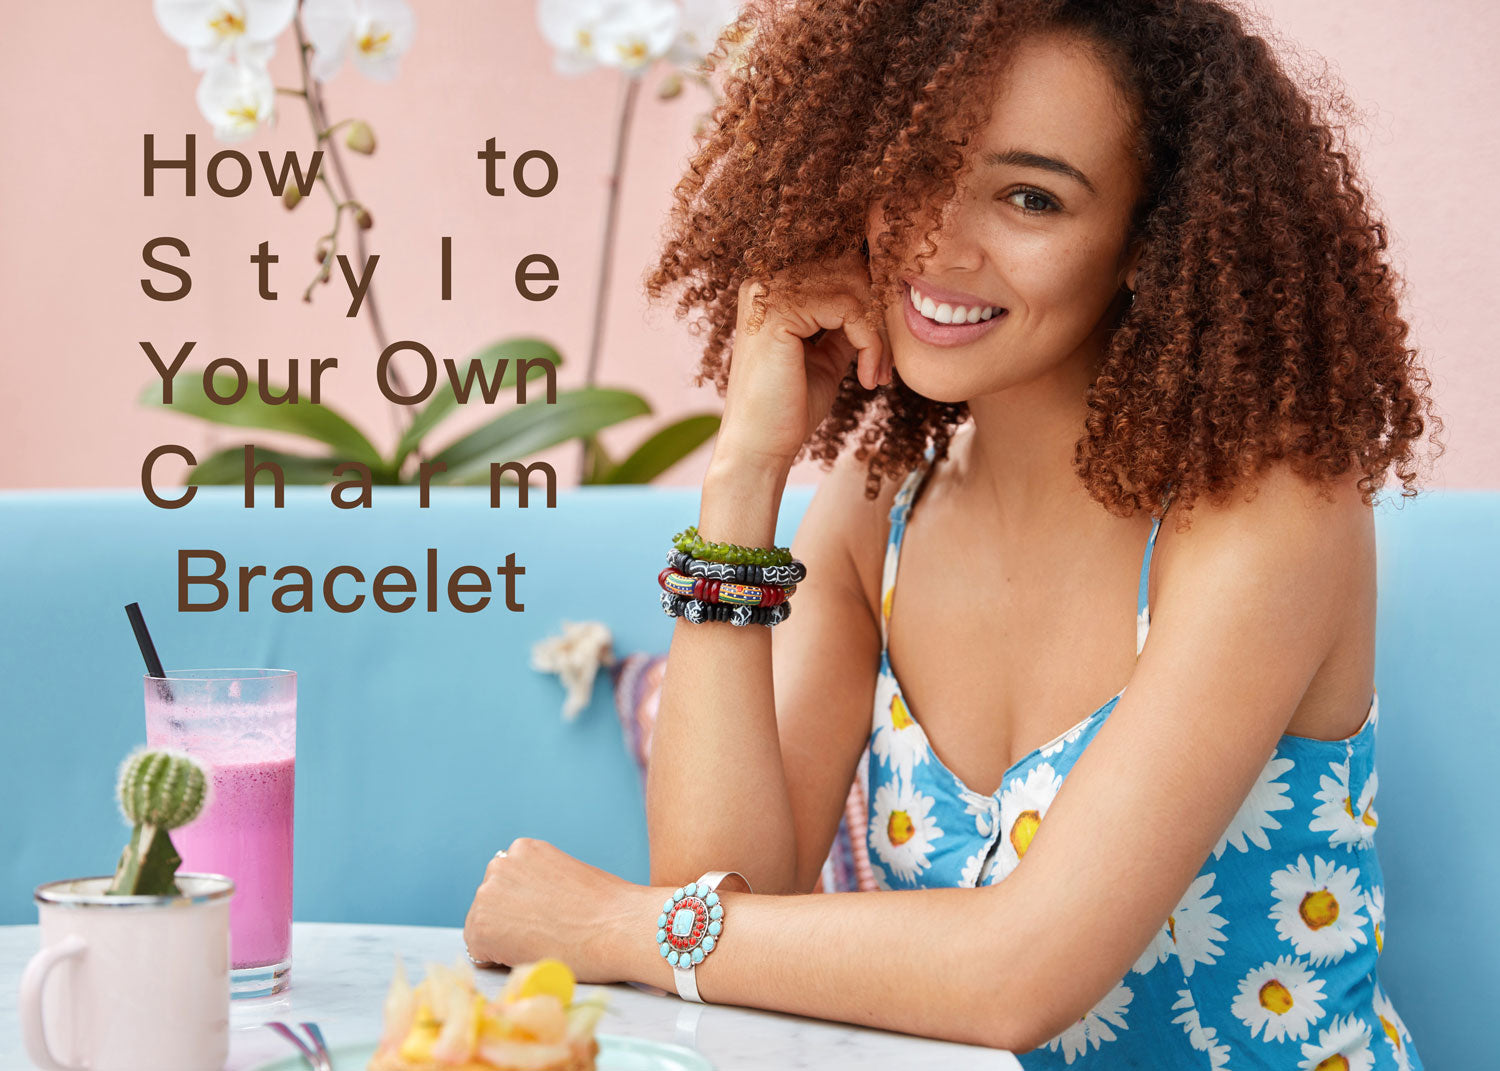 How to Style Your Own Charm Bracelet?